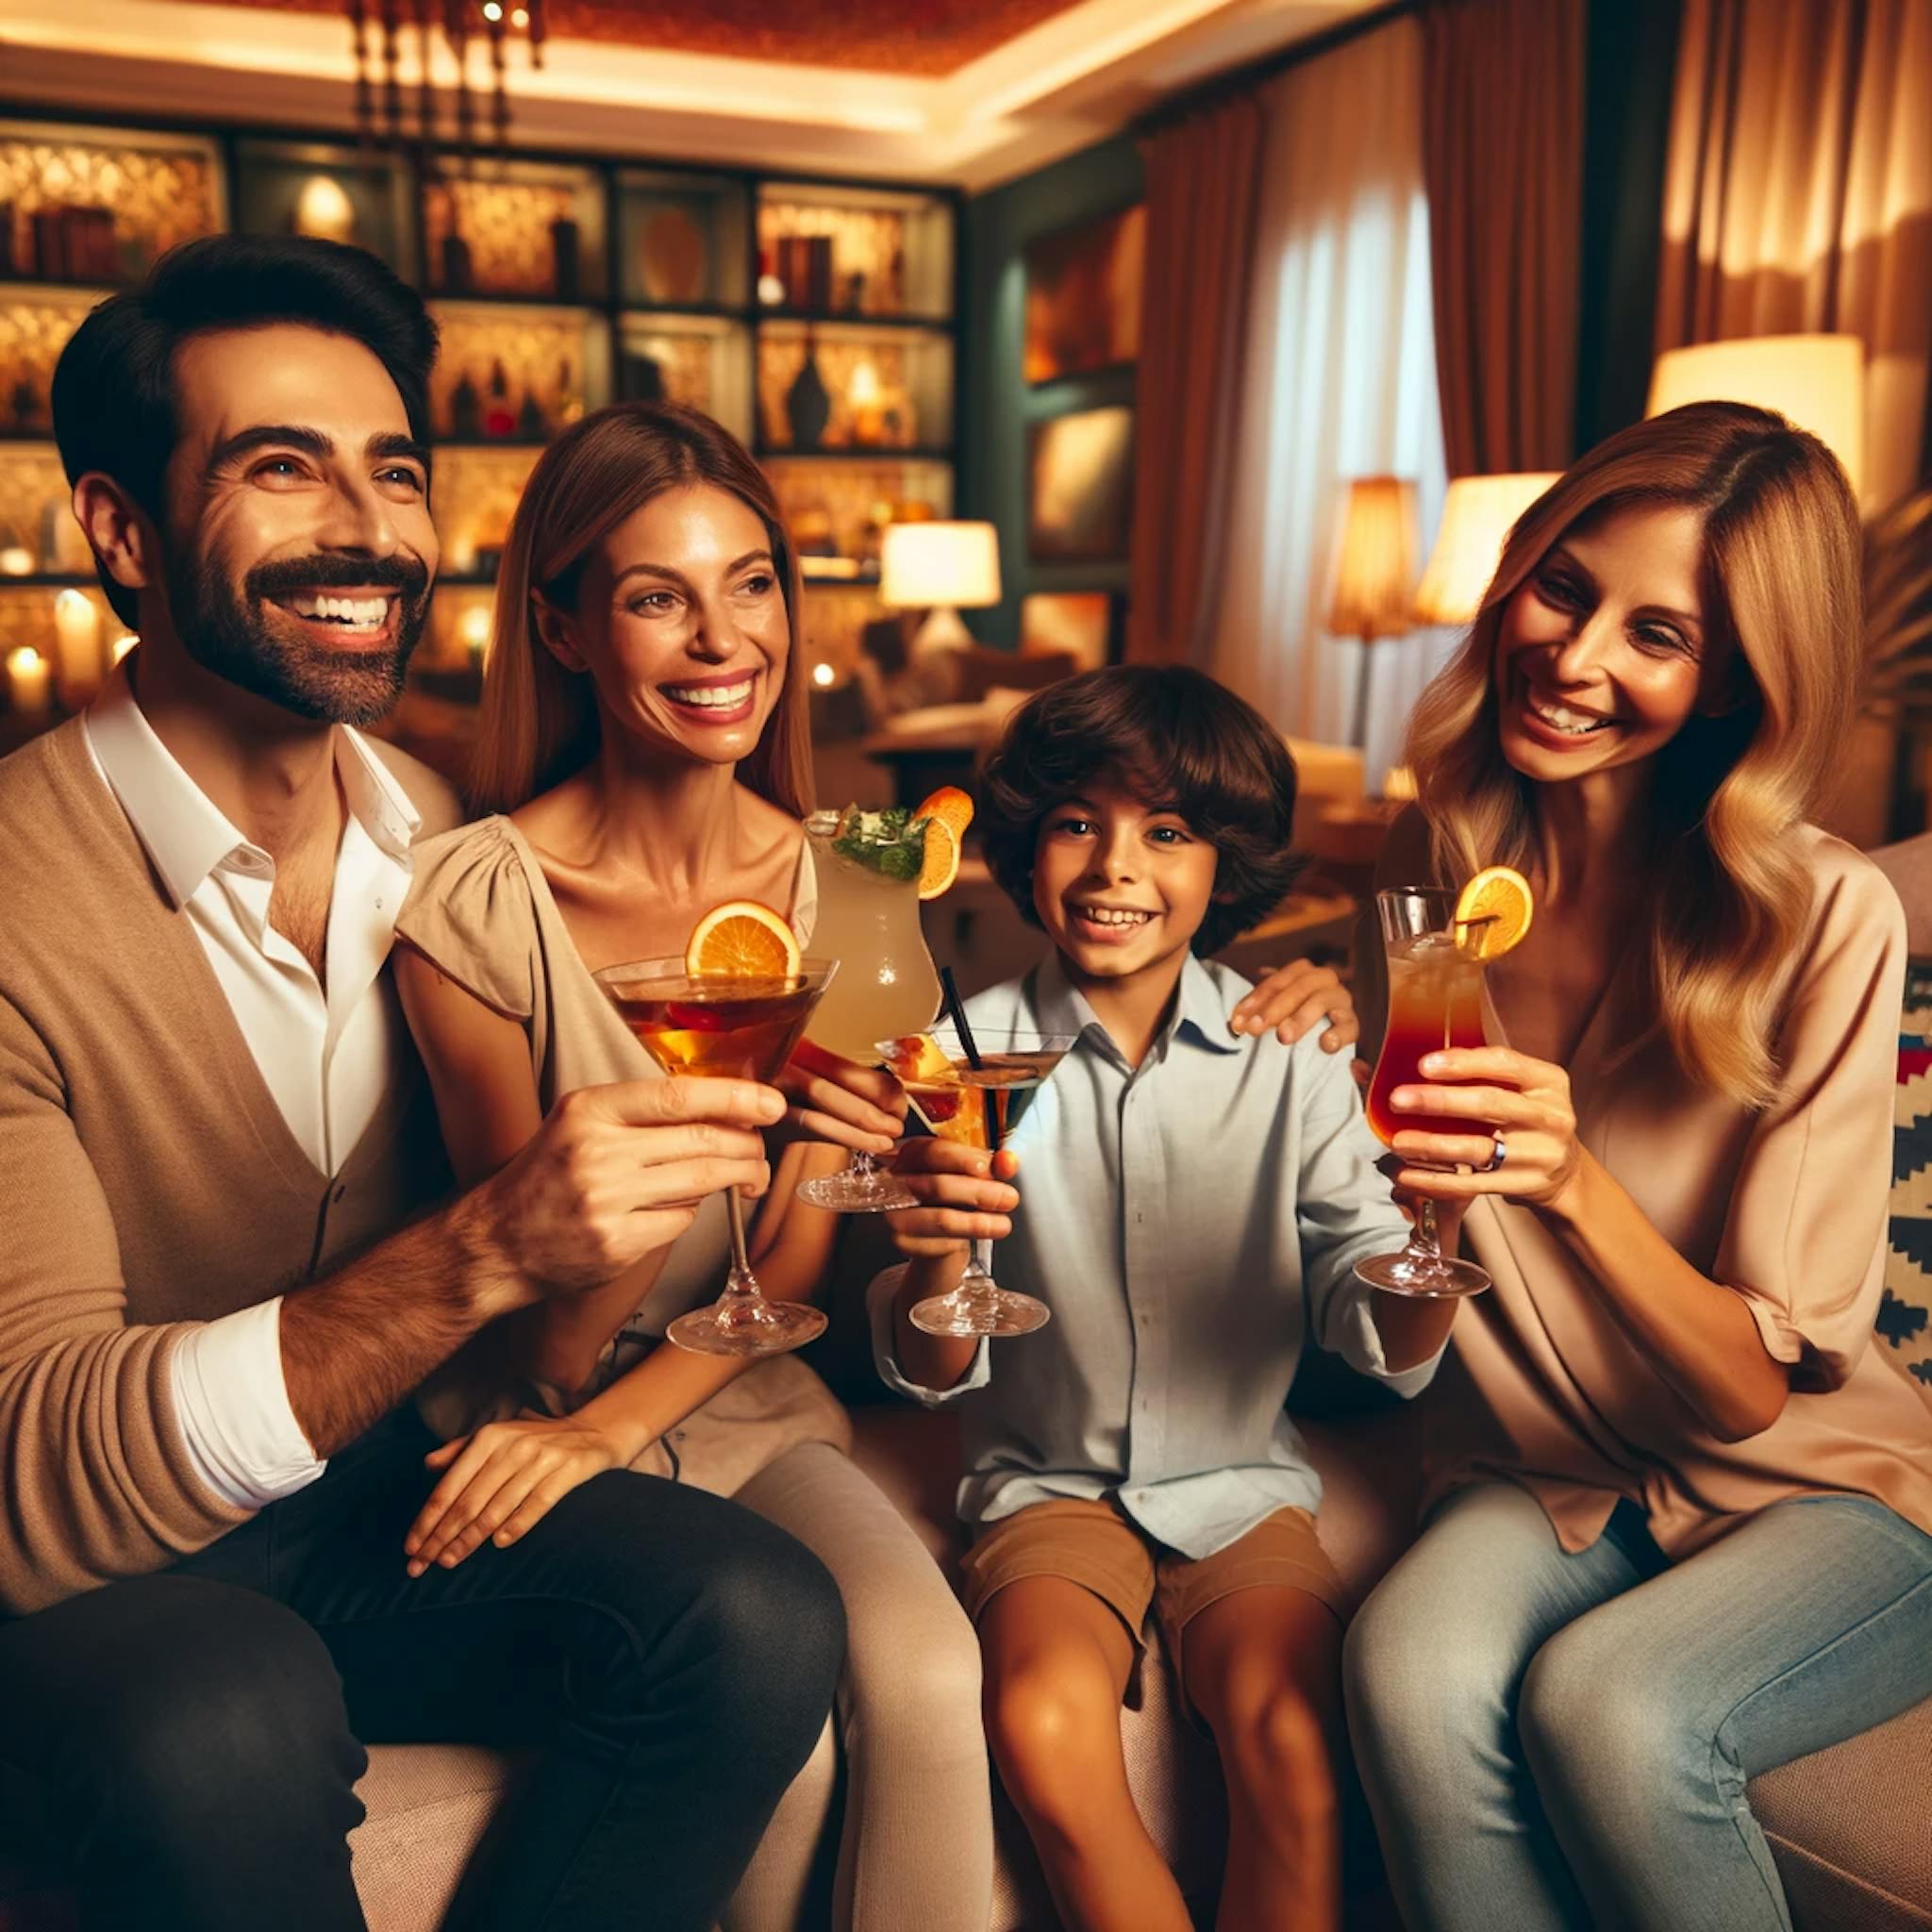  a joyful family sipping cocktails together in an elegantly decorated living room.